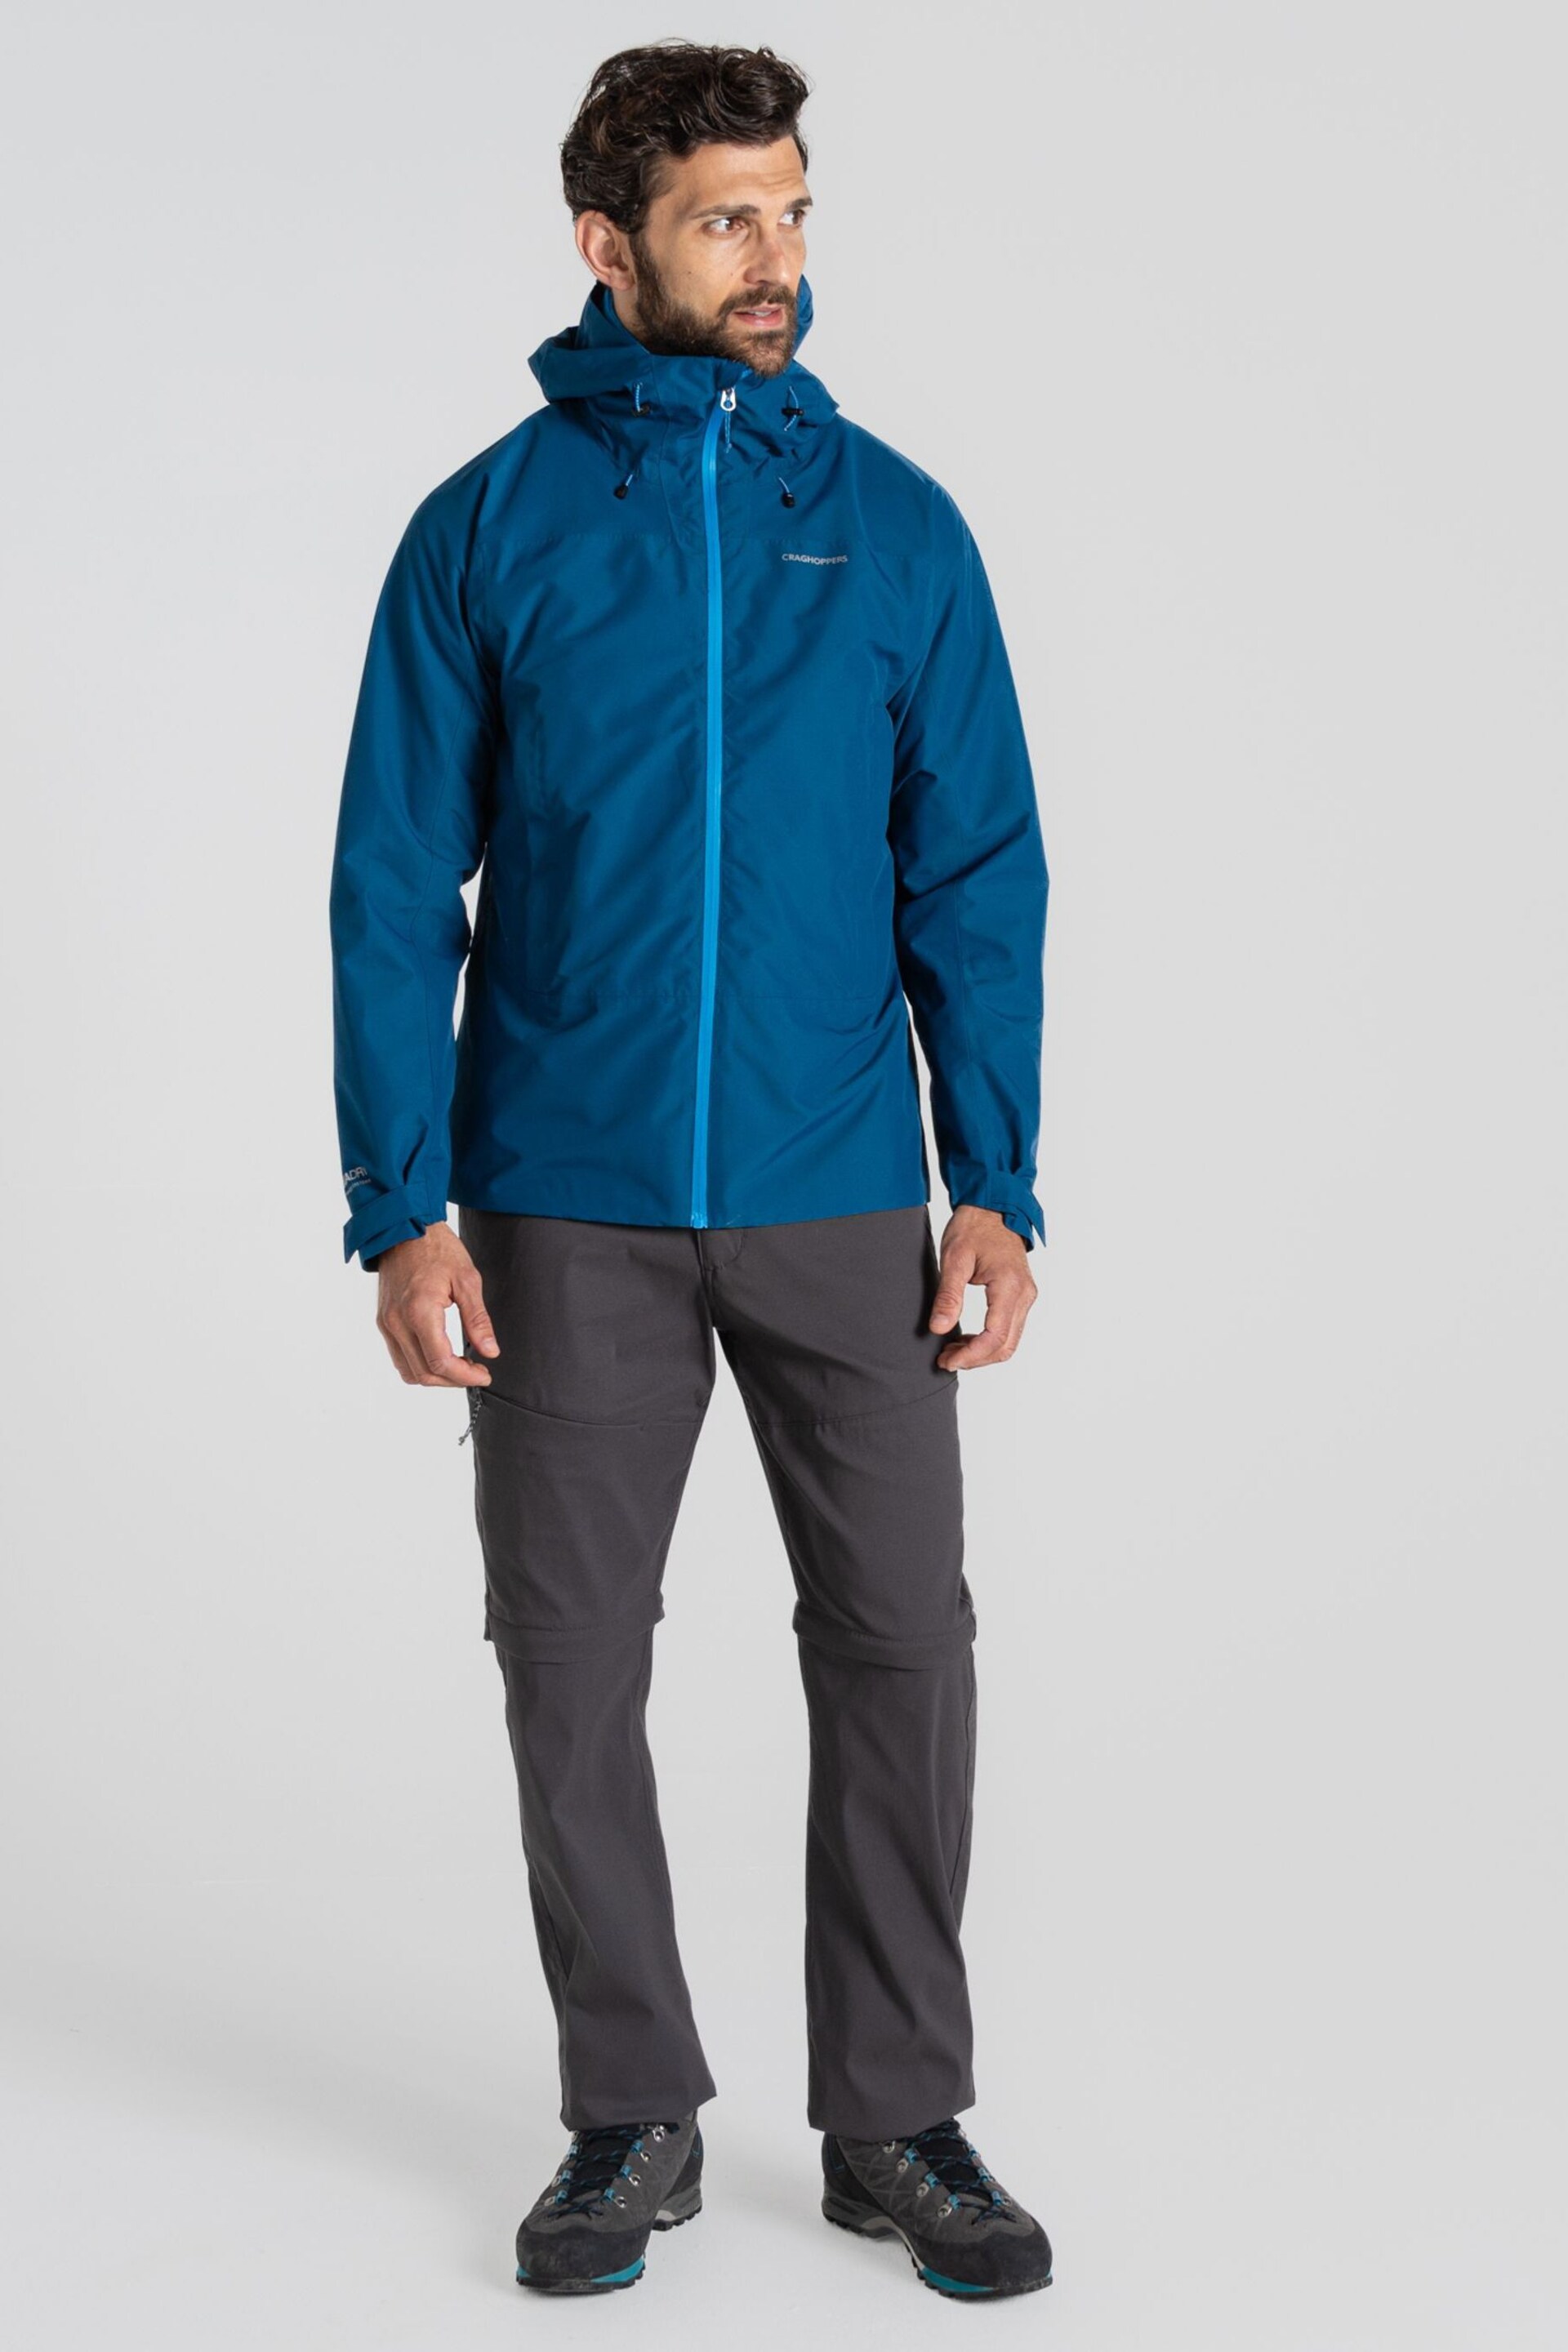 Craghoppers Blue Creevey Jacket - Image 8 of 14